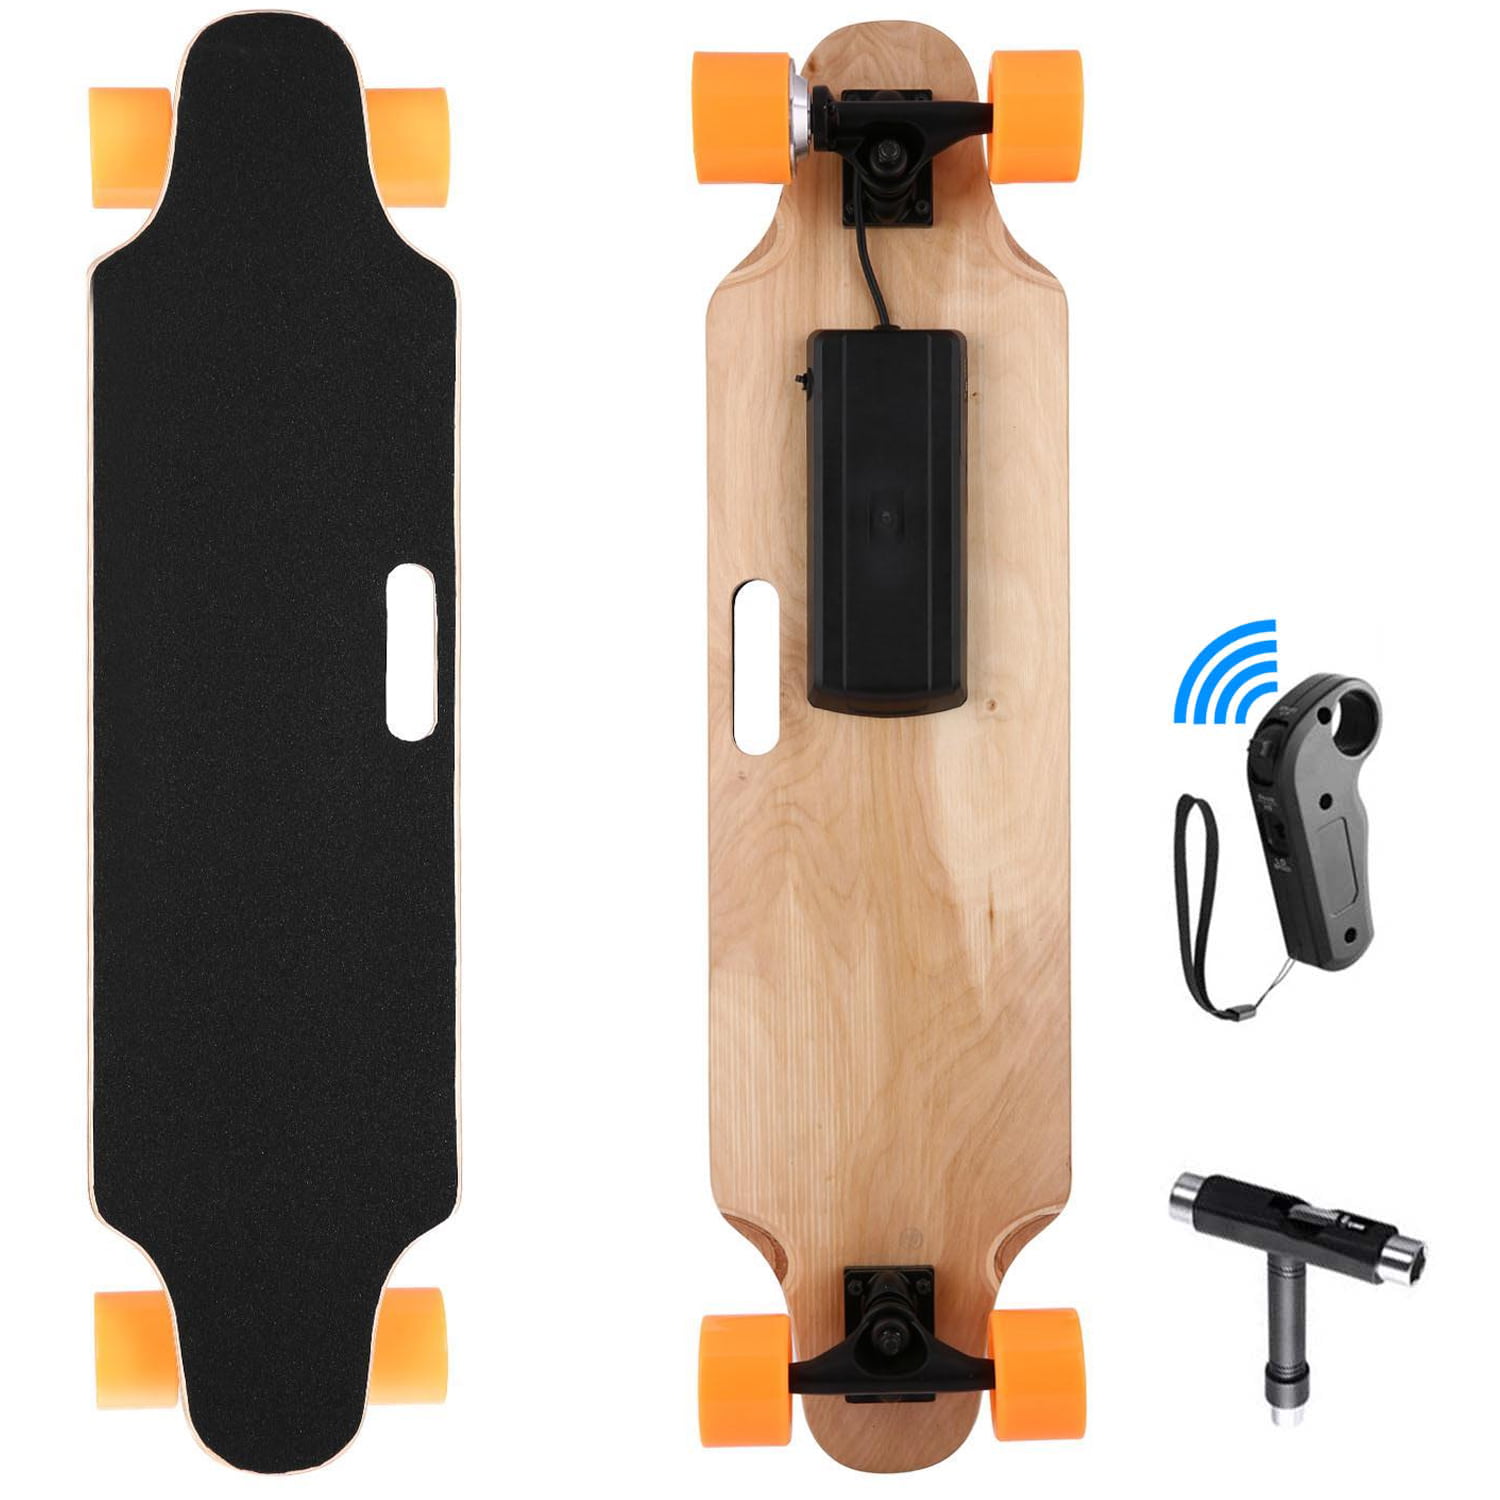 Details about   Fast Electric Skateboard 20MPH HUB Motor Remote 7 Layer Maple Board US